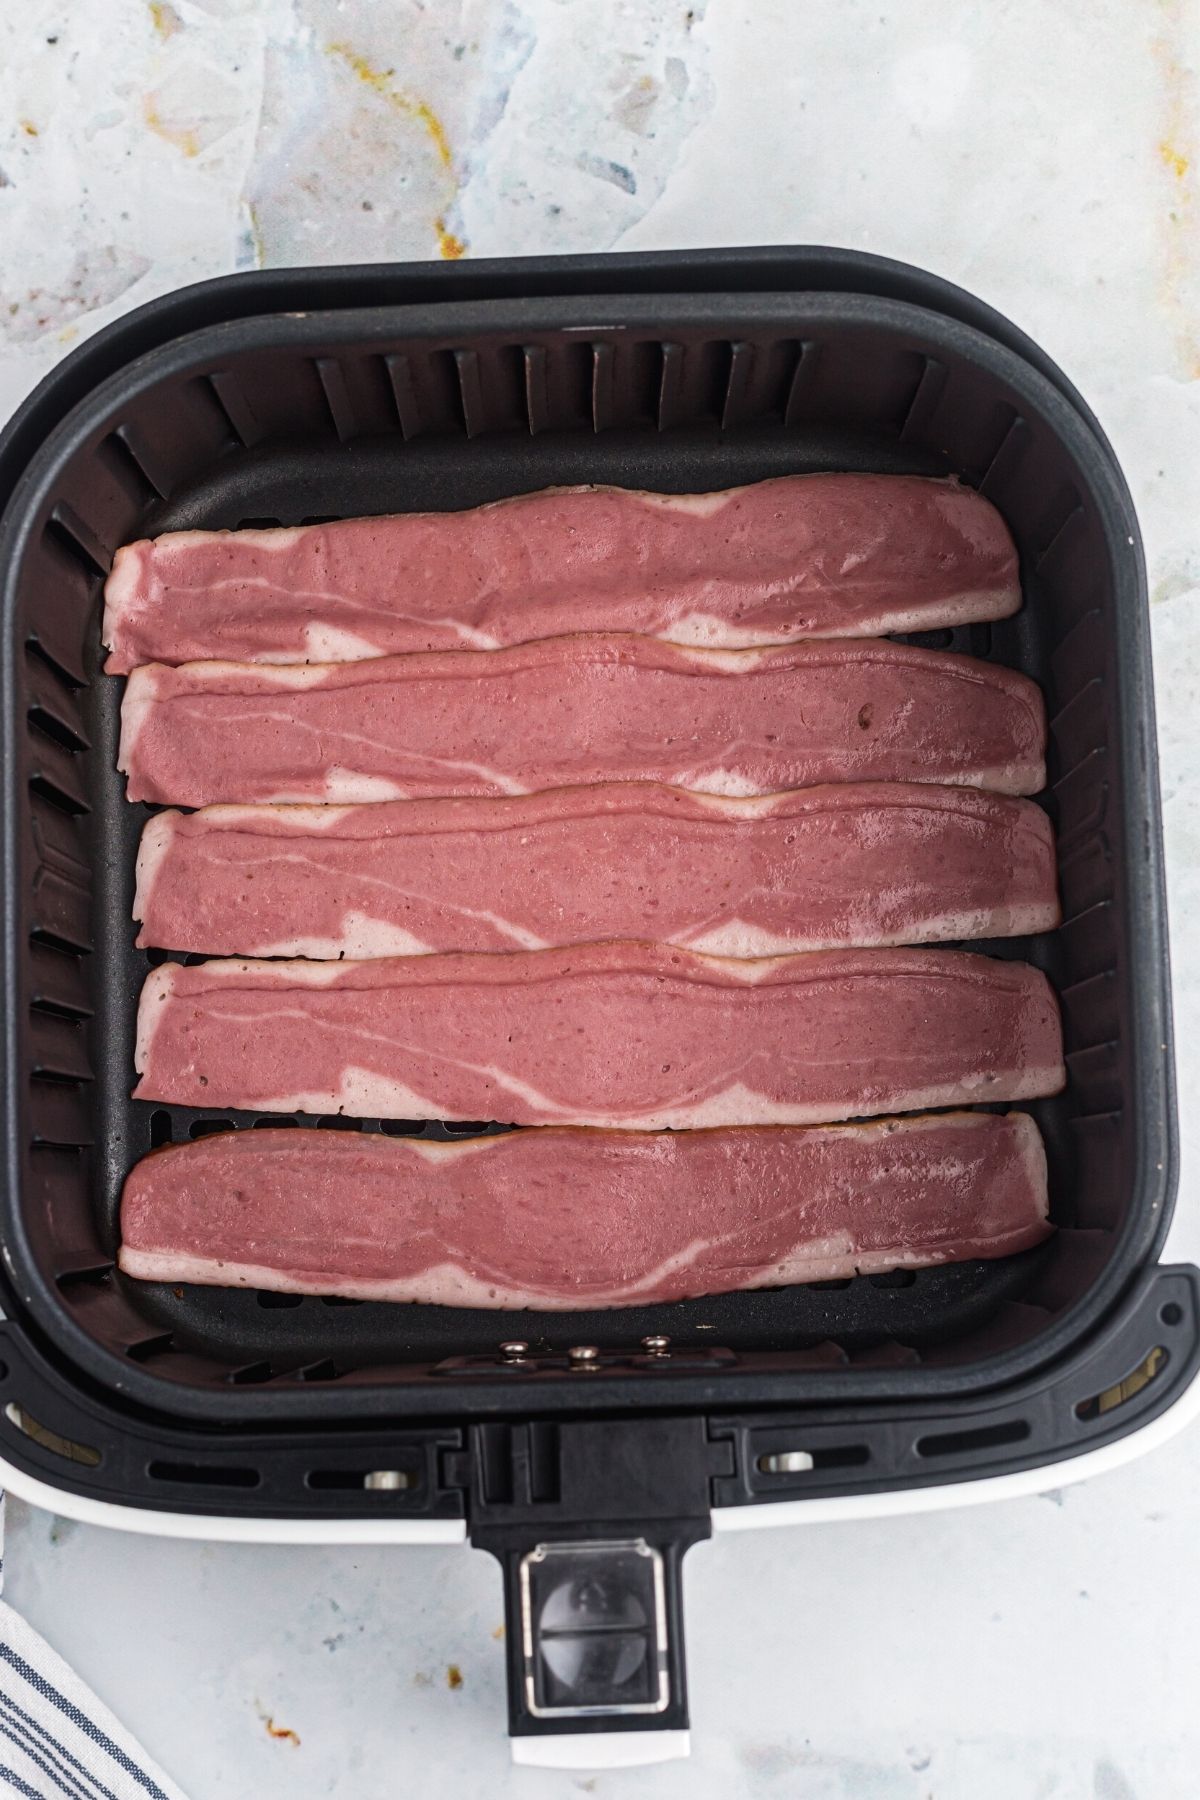 Uncooked turkey bacon in the air fryer basket.